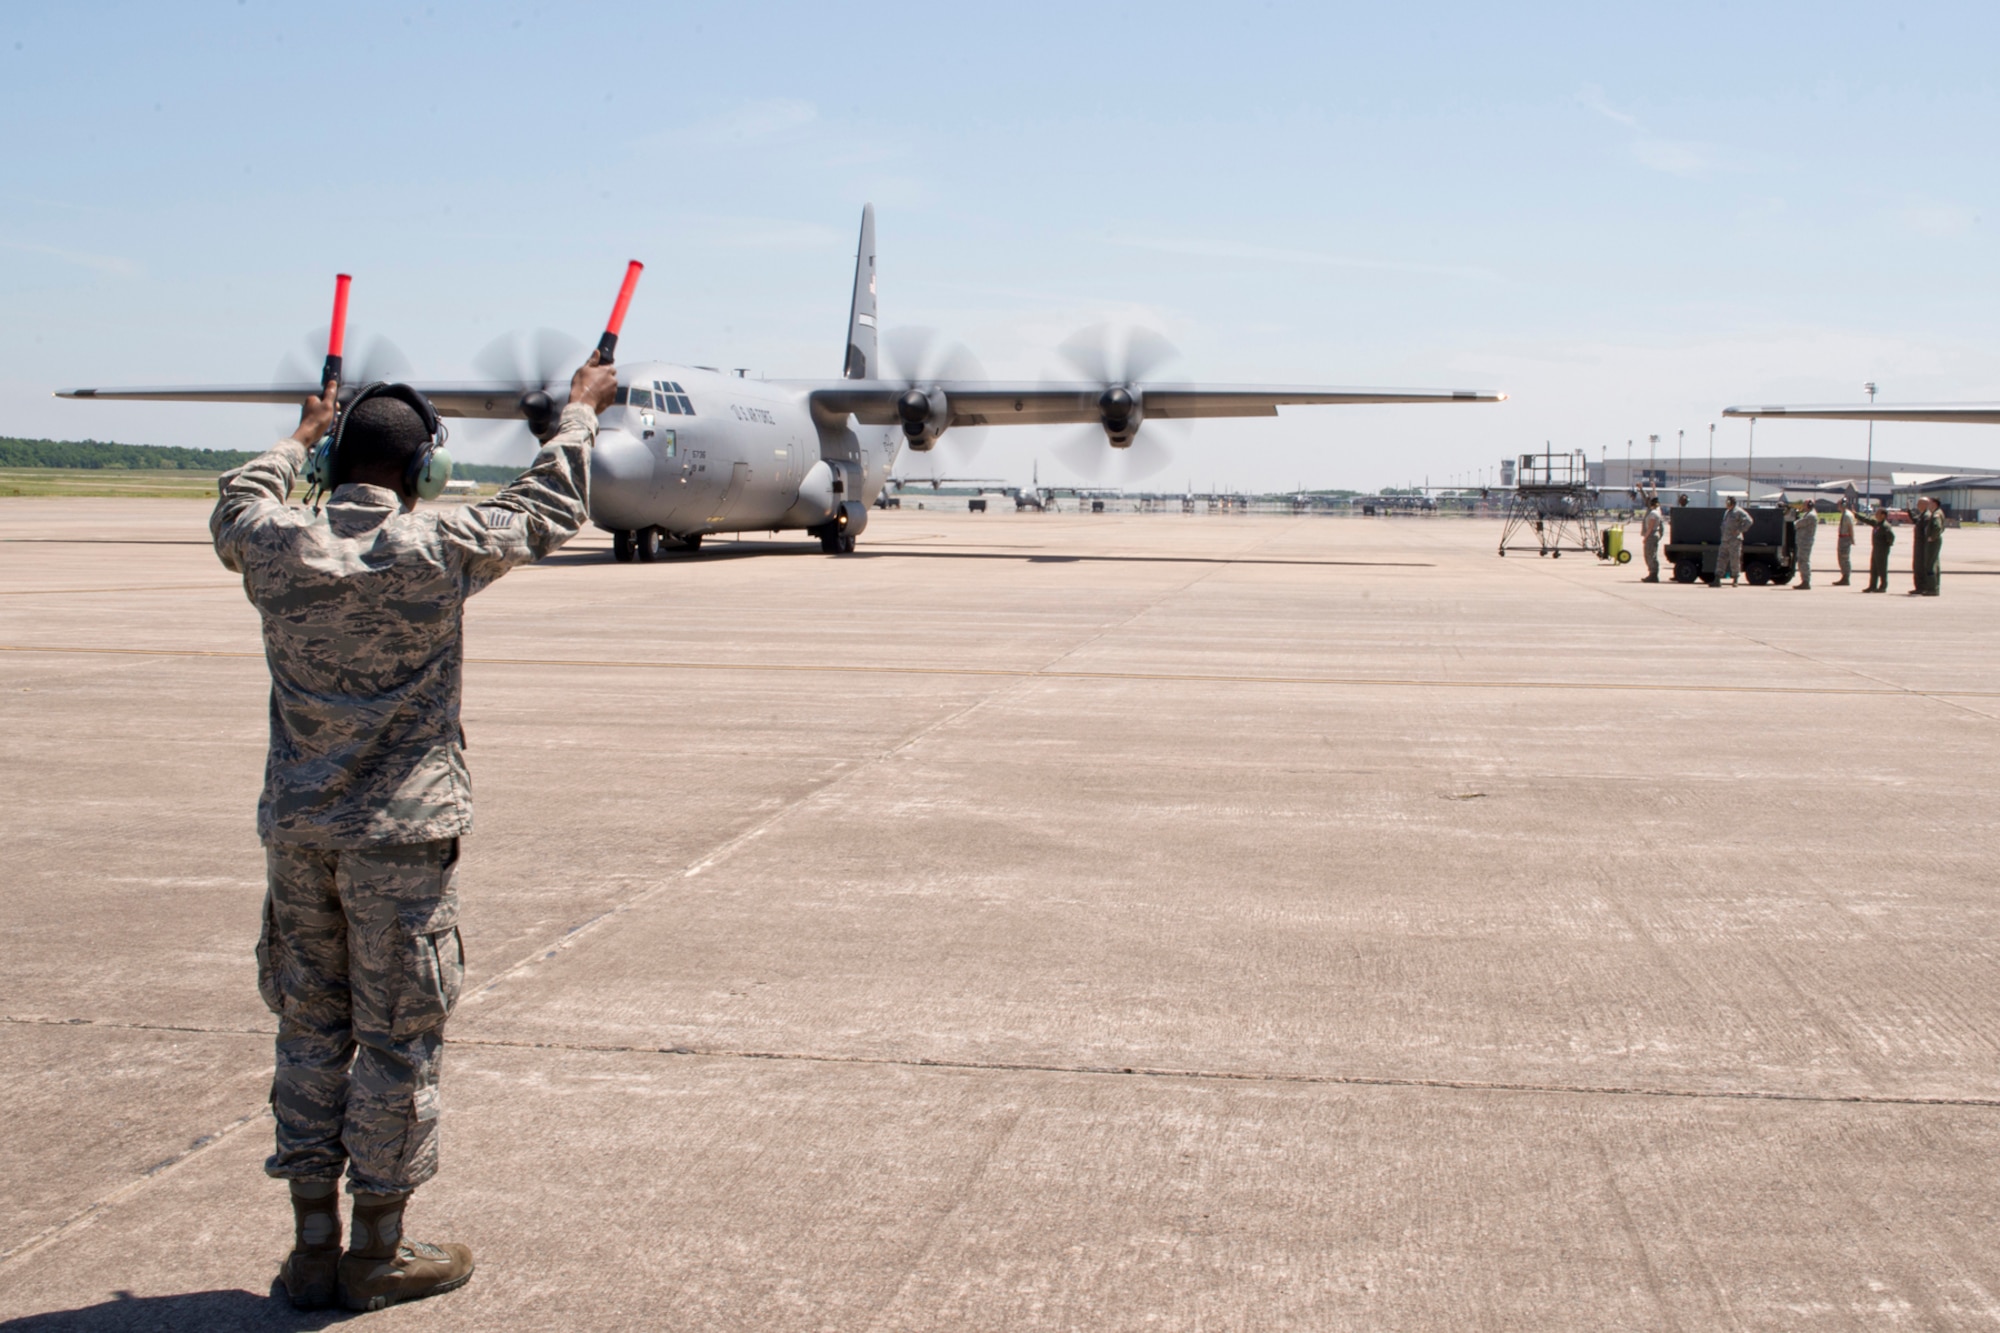 U.S. Air Force Staff Sgt. Kquawmae Akins, a crew chief assigned to the 913th Maintenance Squadron, marshals a C-130J aircraft for takeoff from Little Rock Air Force Base, Ark., May 13, 2016. This is the first time a C-130J aircraft has been manned by an all Reserve aircrew since the 913th Airlift Group’s transition from the “H” model to the “J” model. (U.S. Air Force photo by Master Sgt. Jeff Walston/Released)